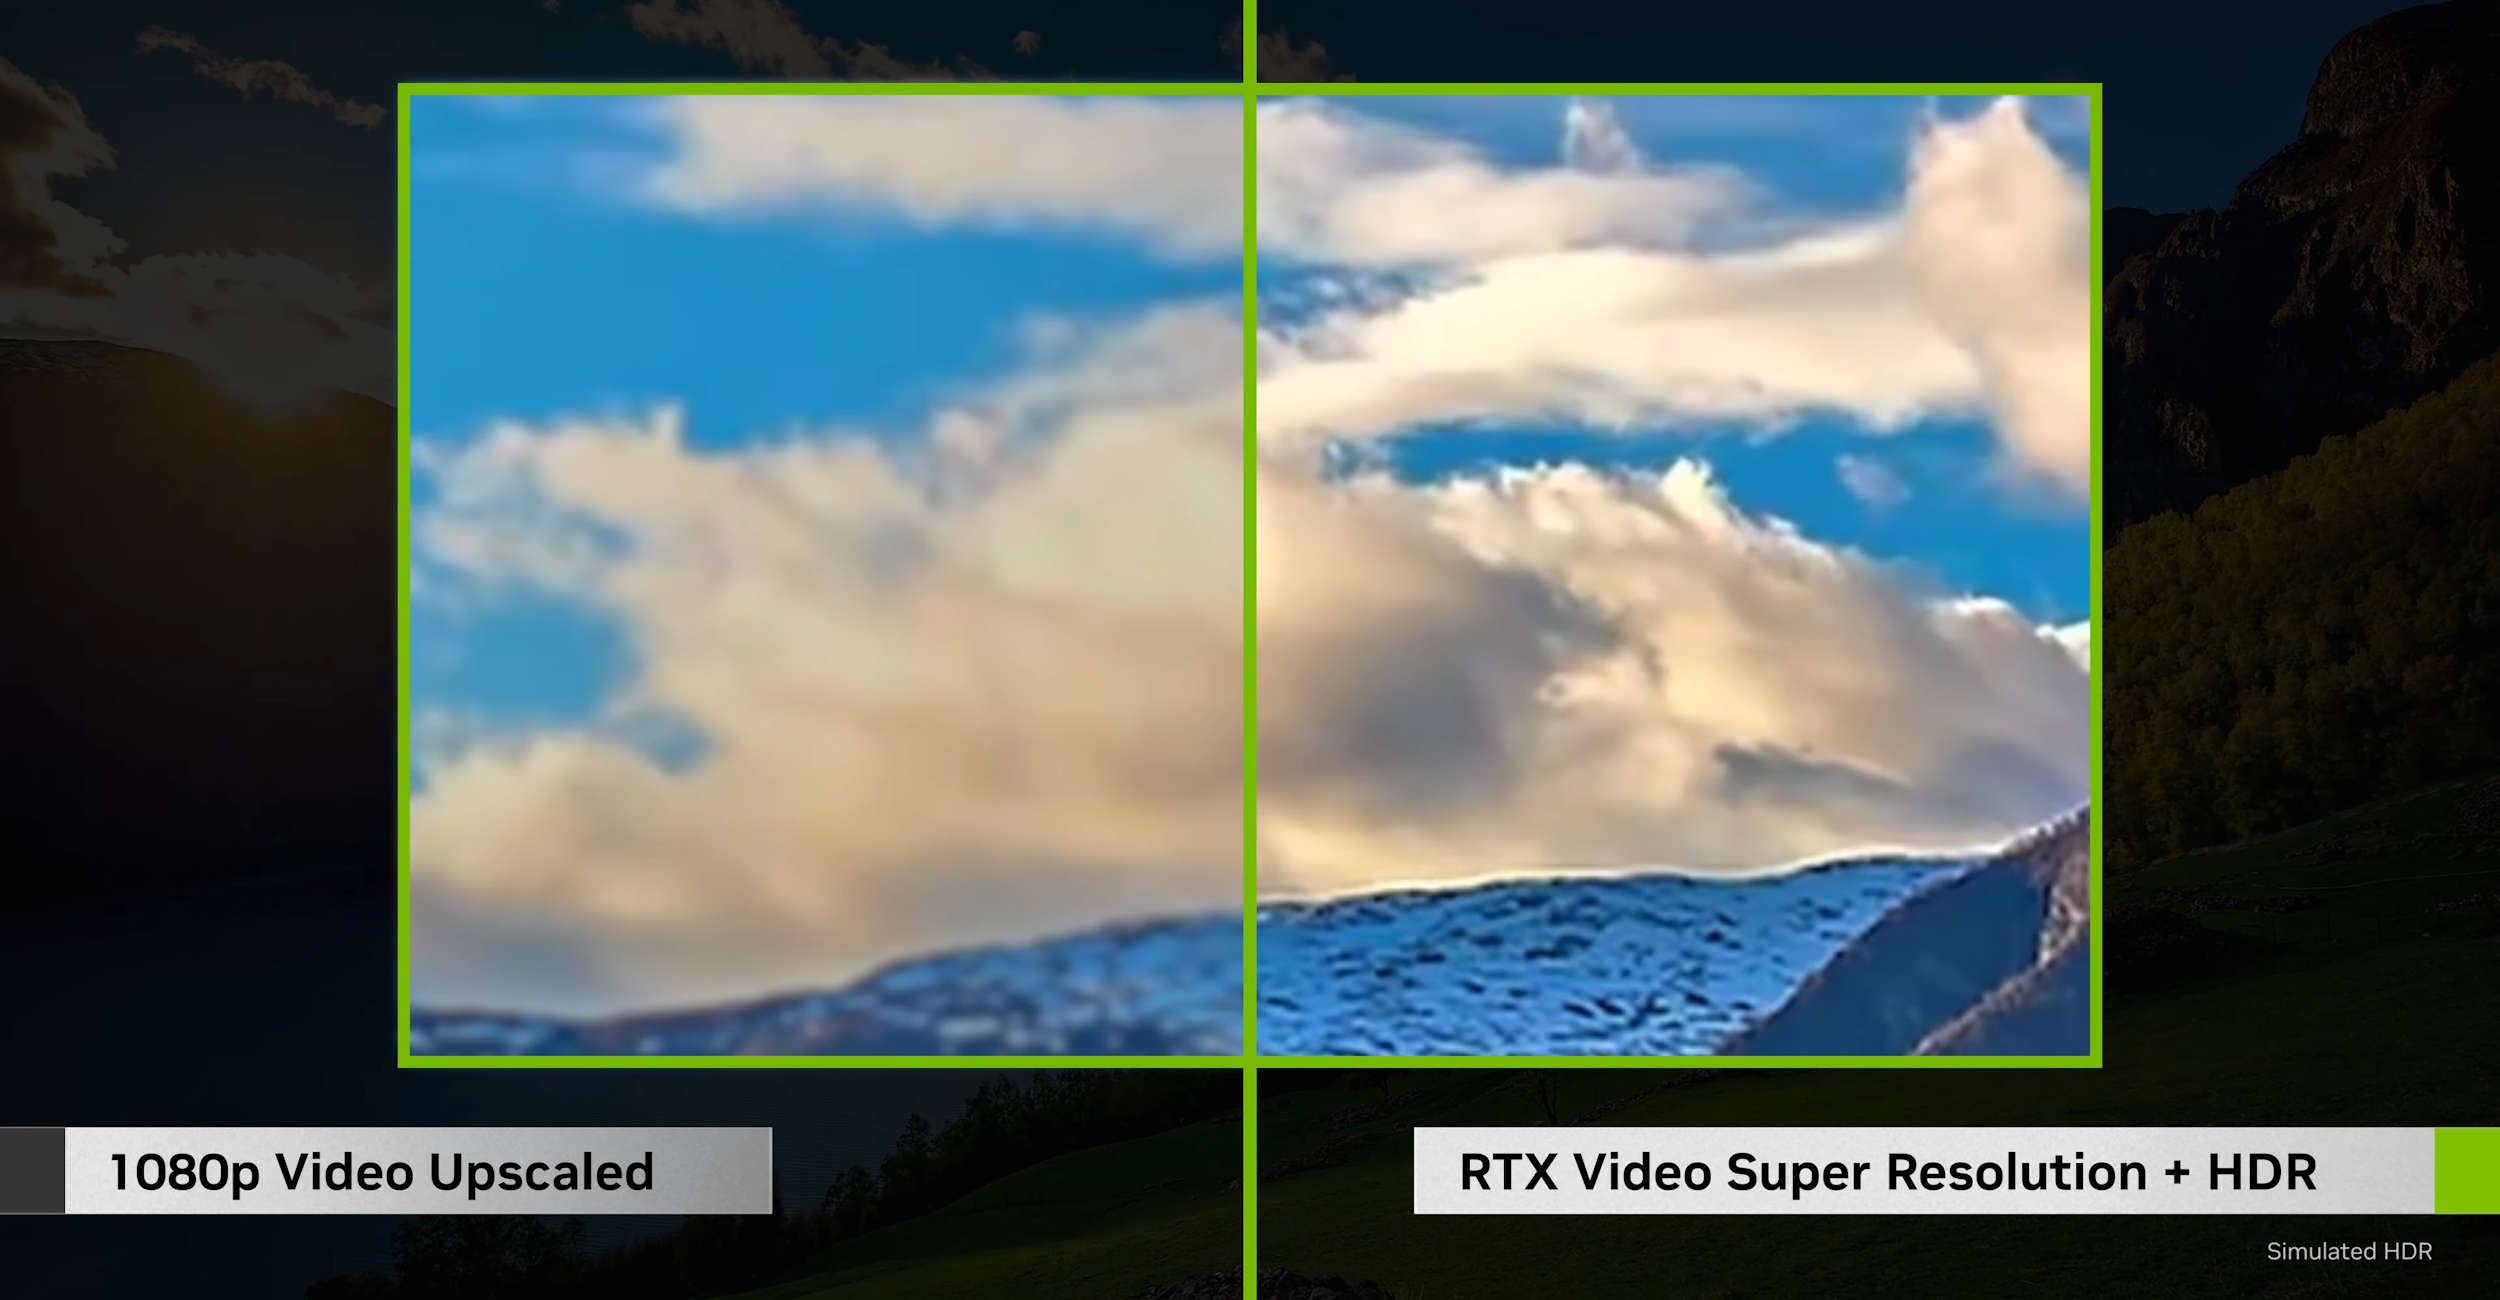 Nvidia boosts the quality of online video with RTX Video HDR